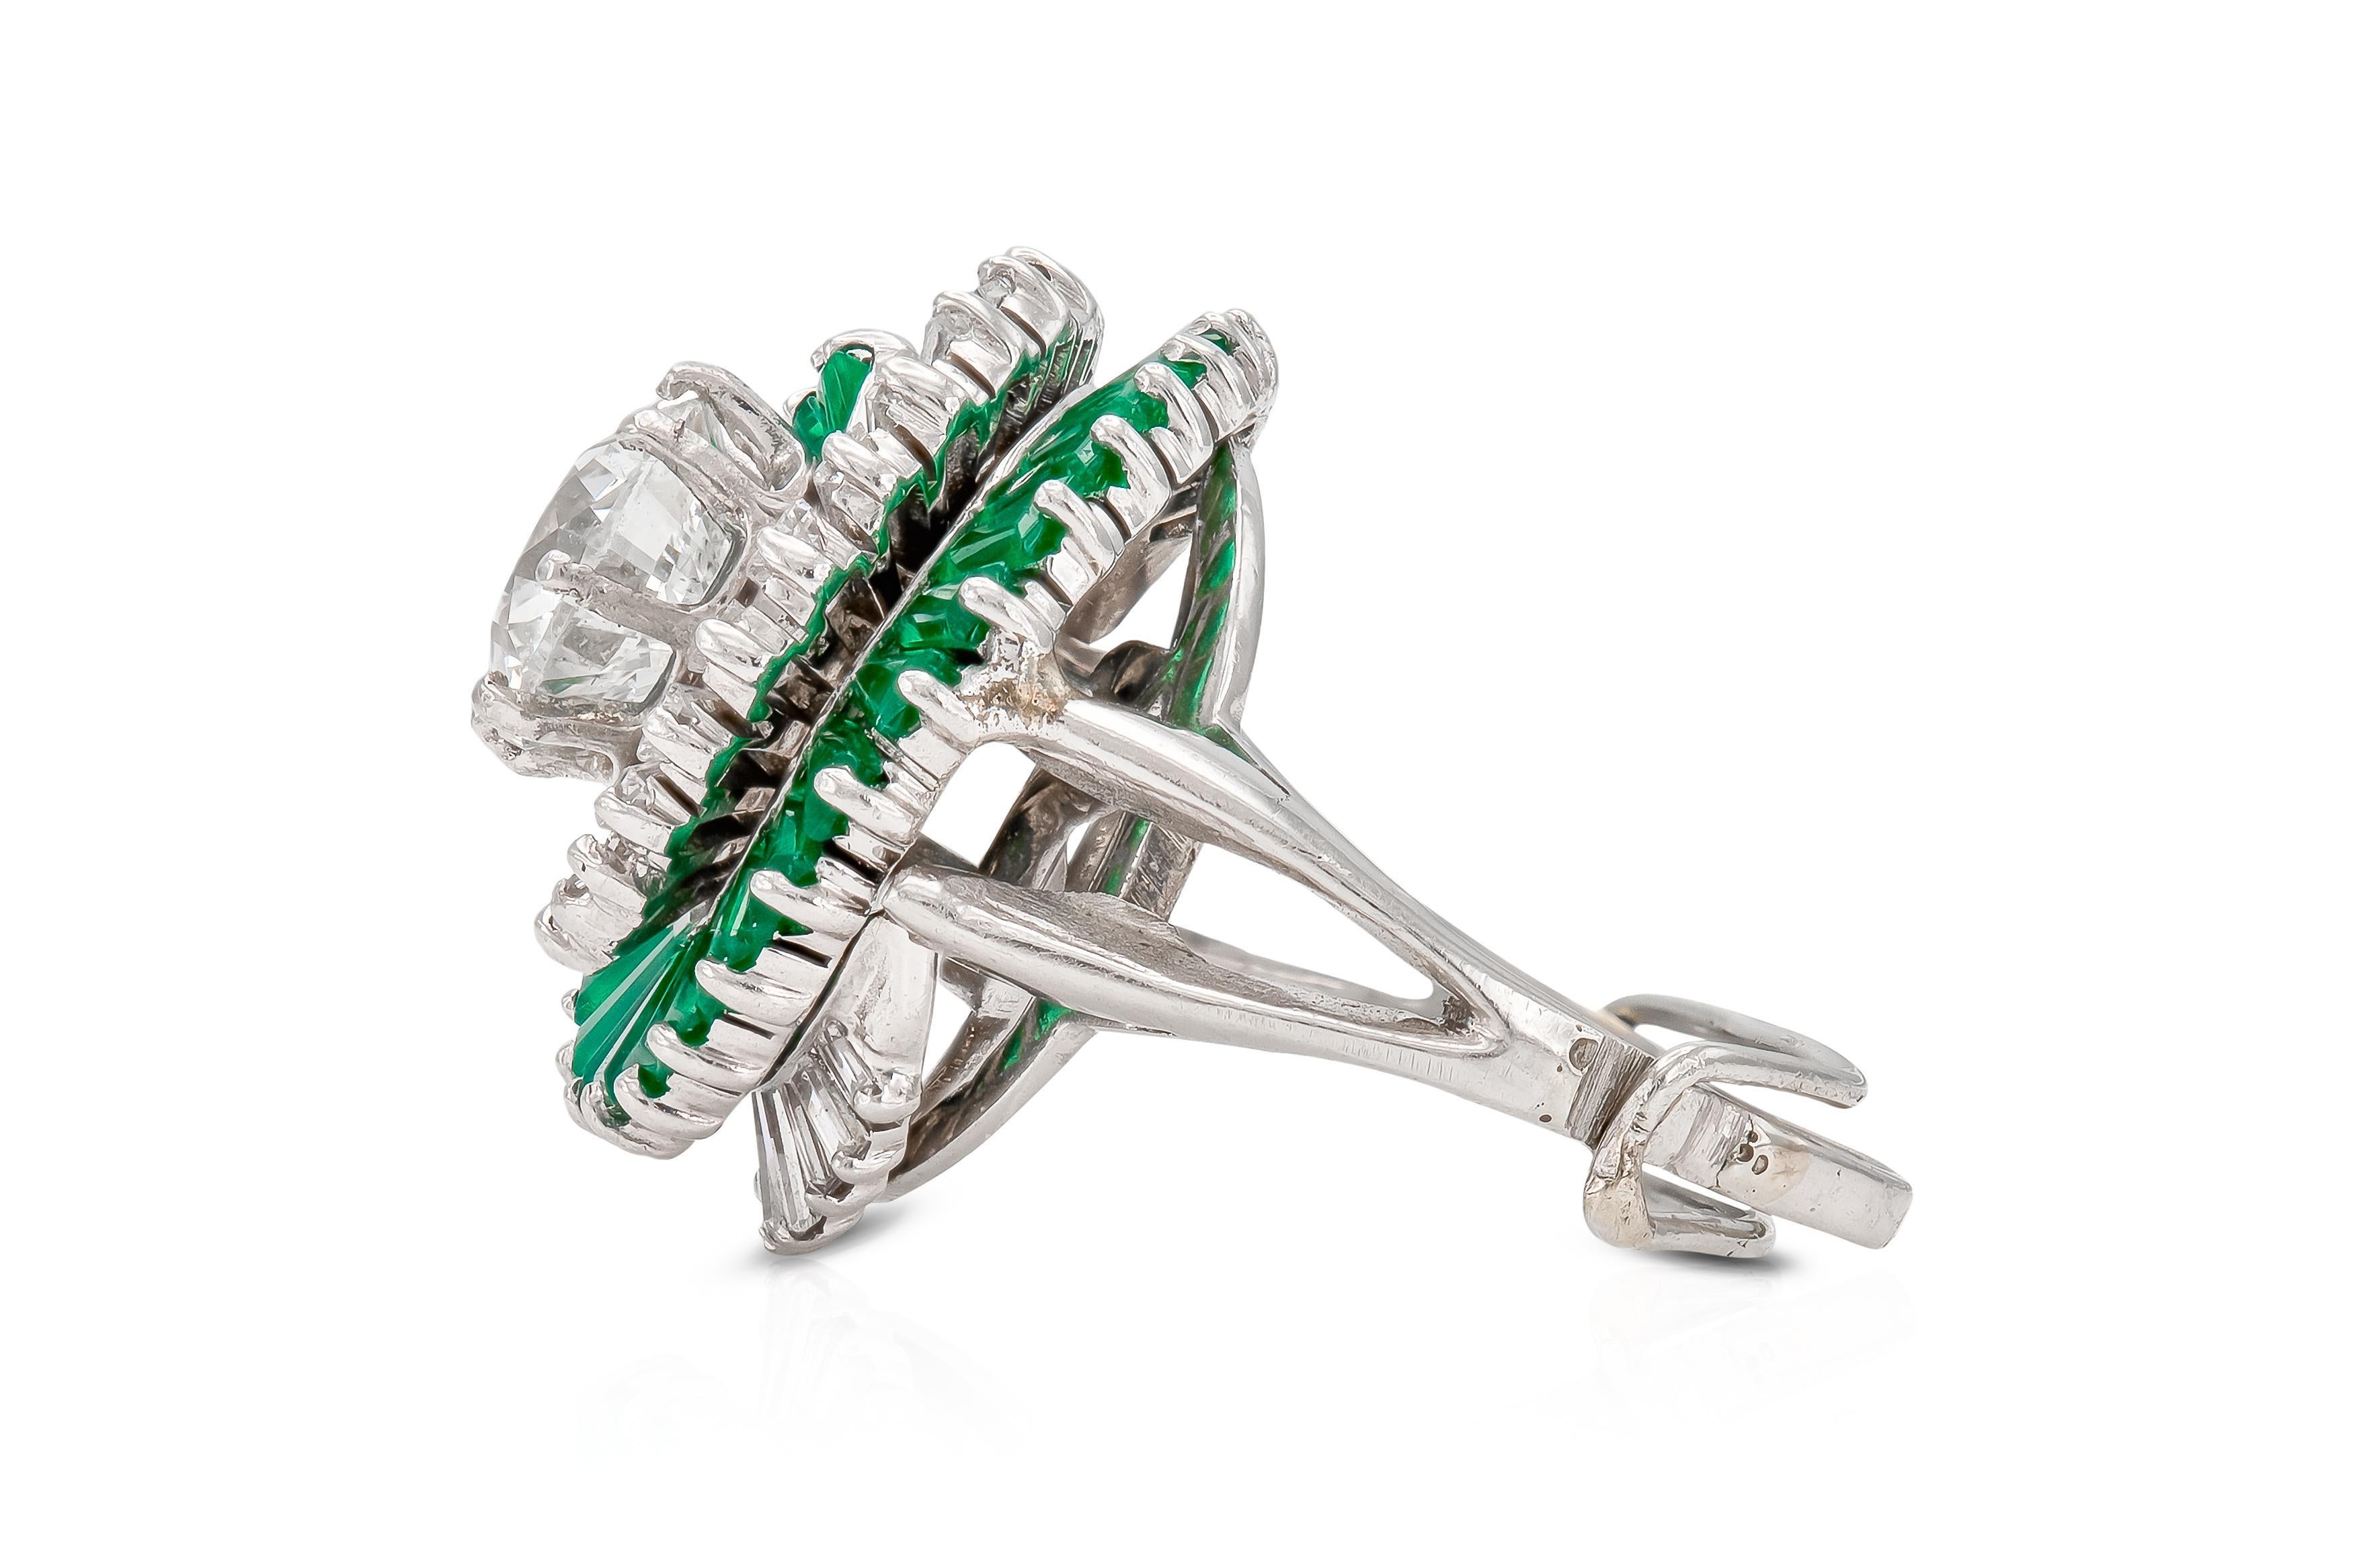 Round Cut Vintage 1950s 1.52 Carat Diamond Ring with Emerald and Diamond Swirl Setting For Sale